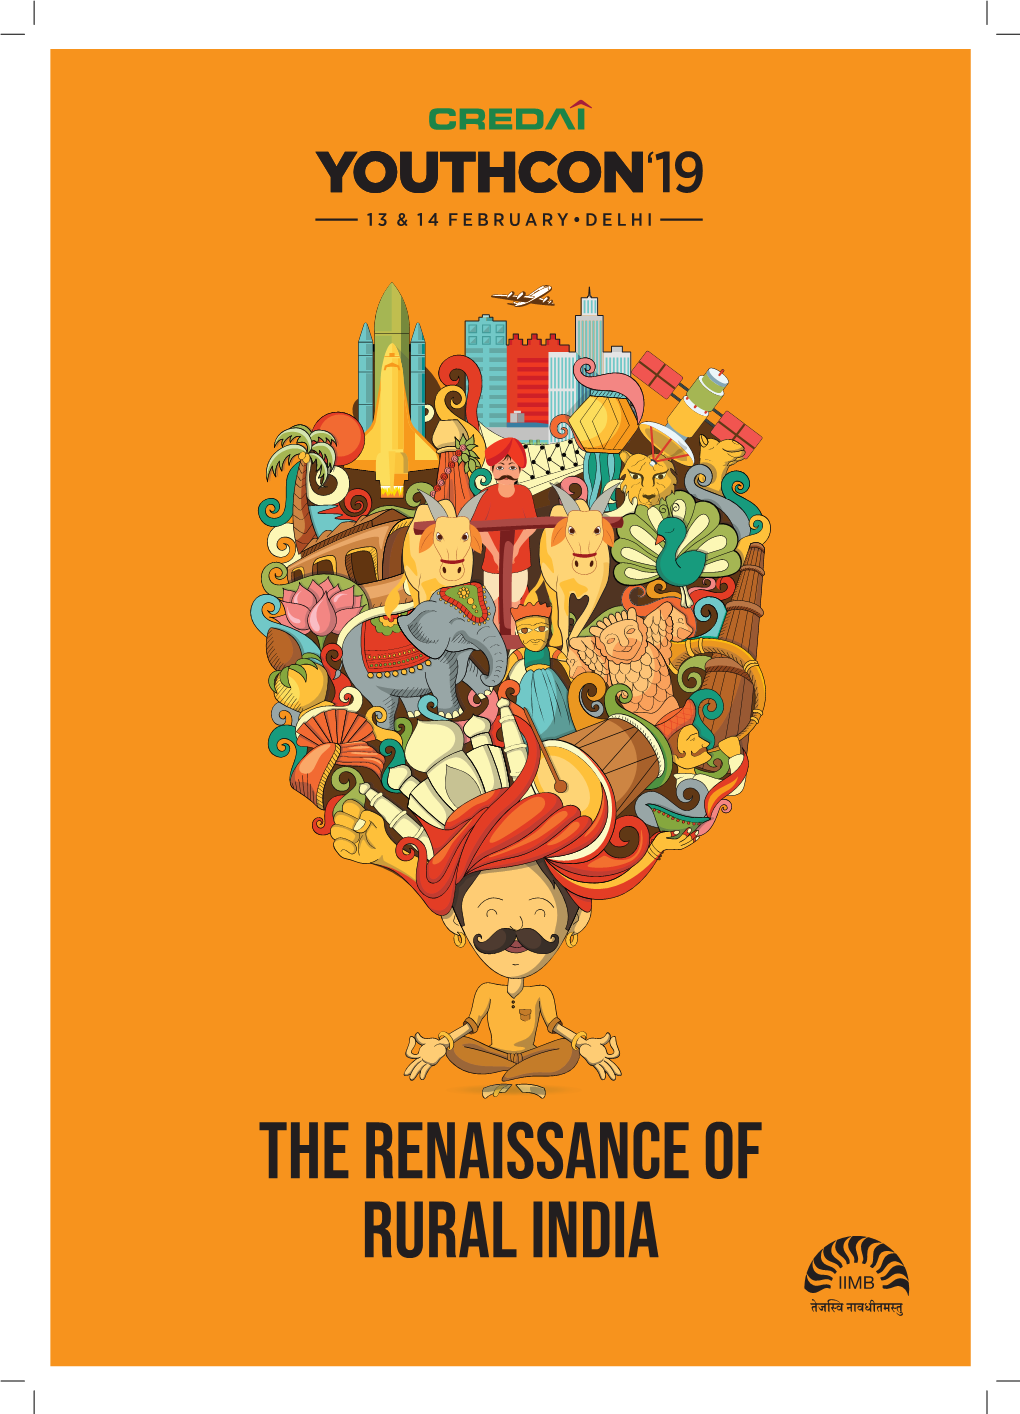 The Renaissance of RURAL INDIA the RENAISSANCE of RURAL INDIA